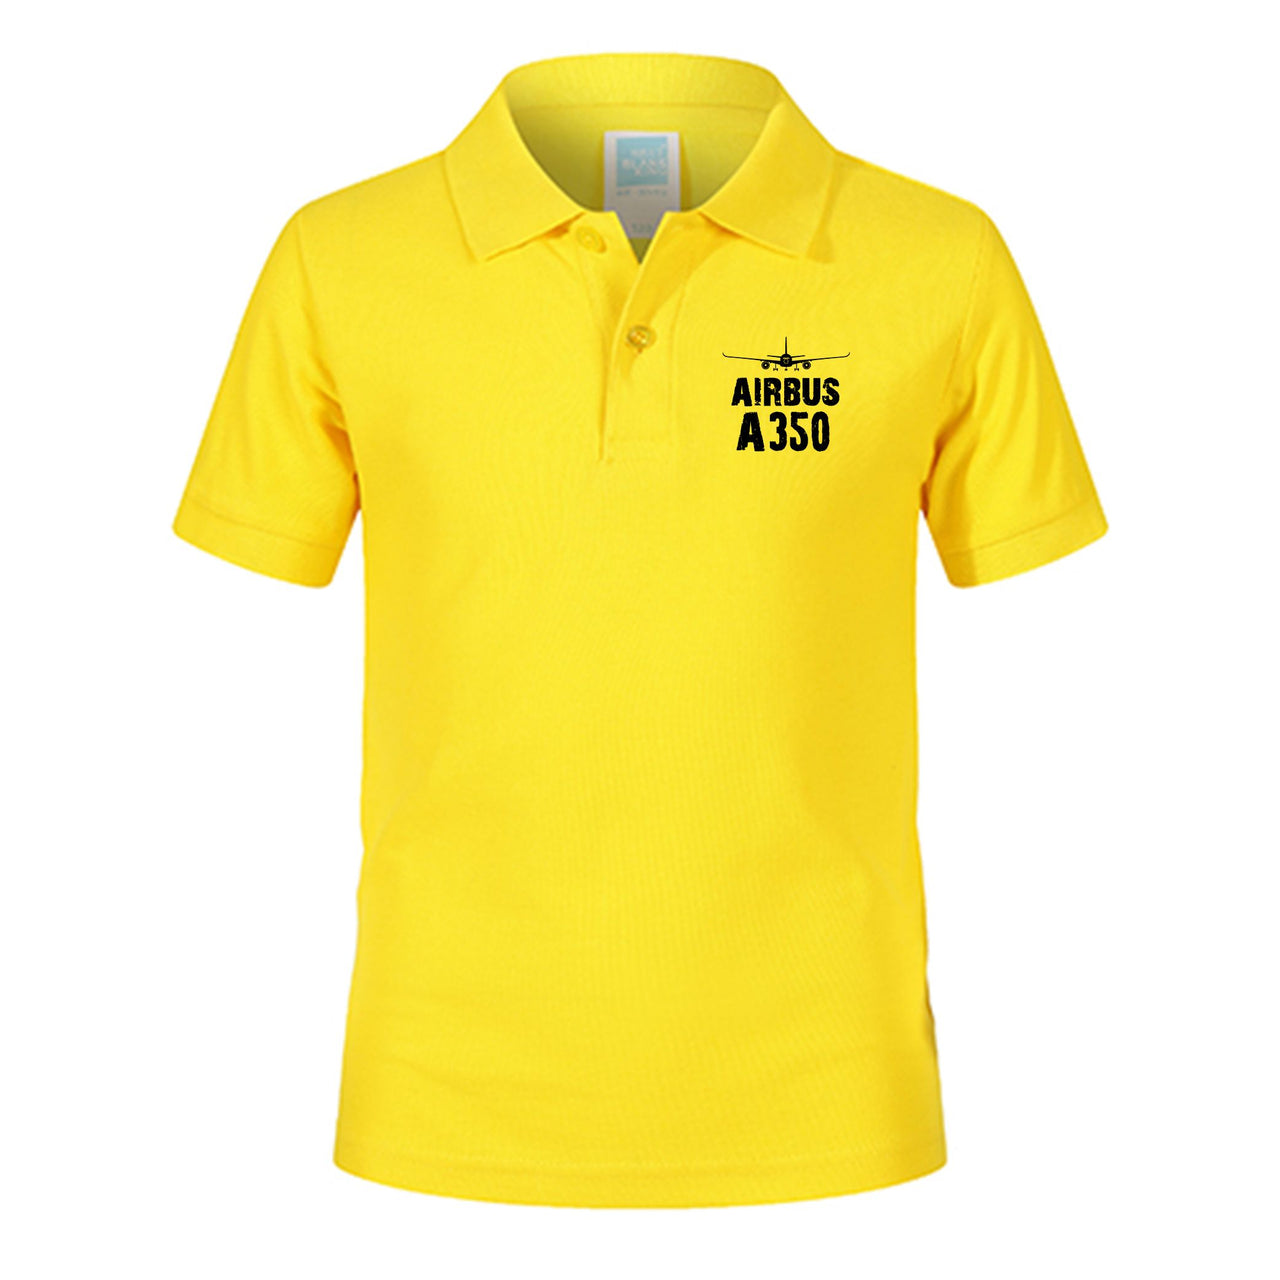 Airbus A350 & Plane Designed Children Polo T-Shirts